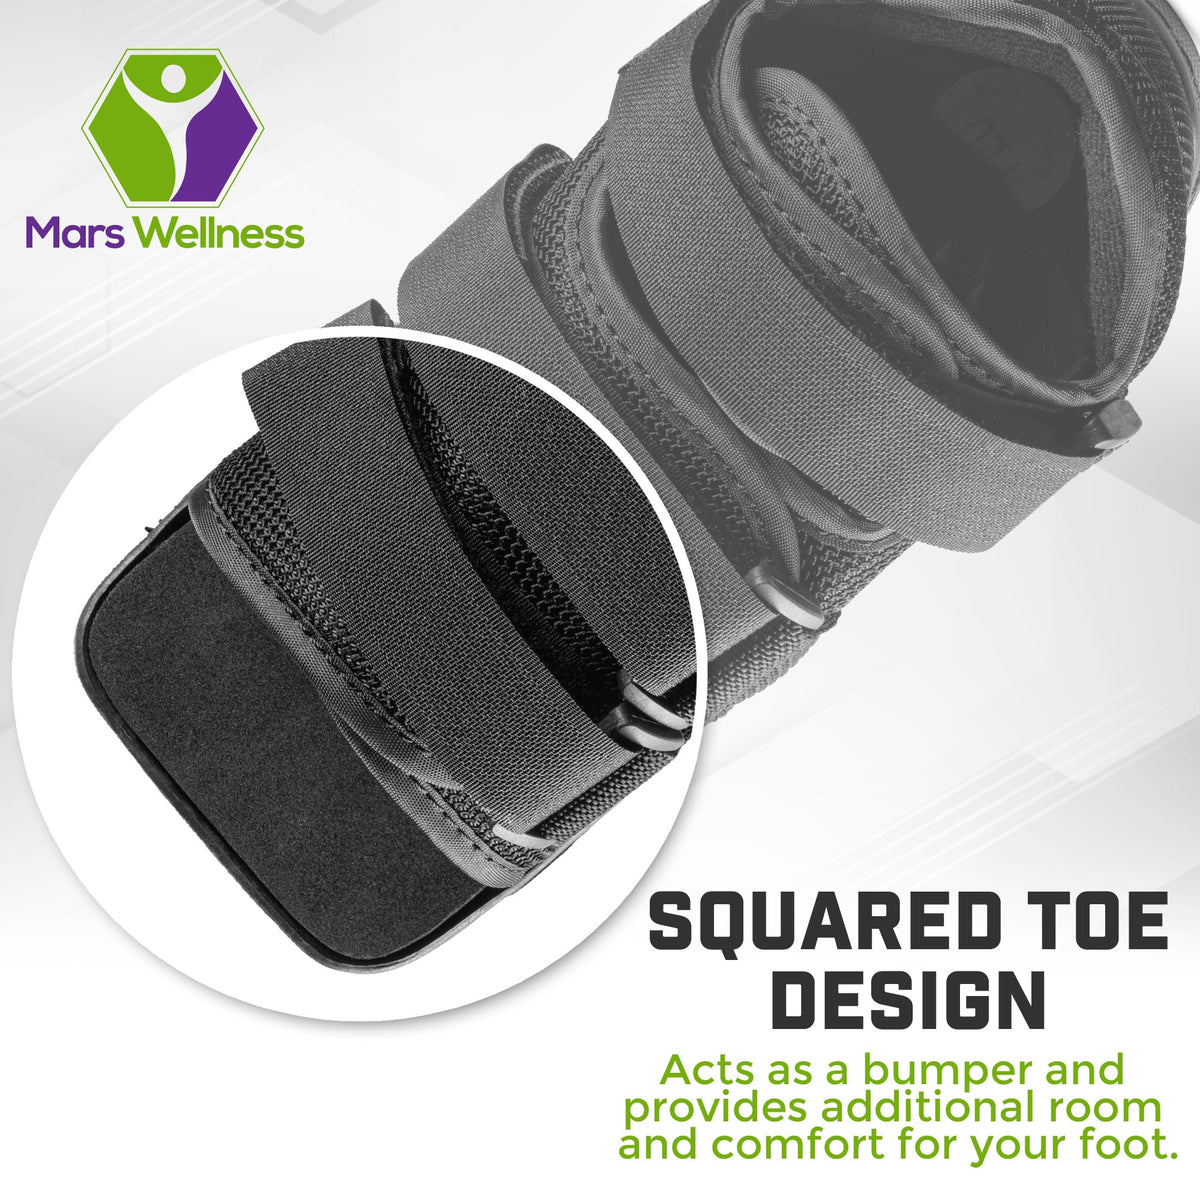 Mars Wellness Premium Childrens Post Op Broken Toe/Foot Fracture Square Toe Walking Shoe Cast - Pediatric - Fits Little Kids Sizes 11-1 (Approx 3.5-6 Years Old) (Straps Style May Vary)